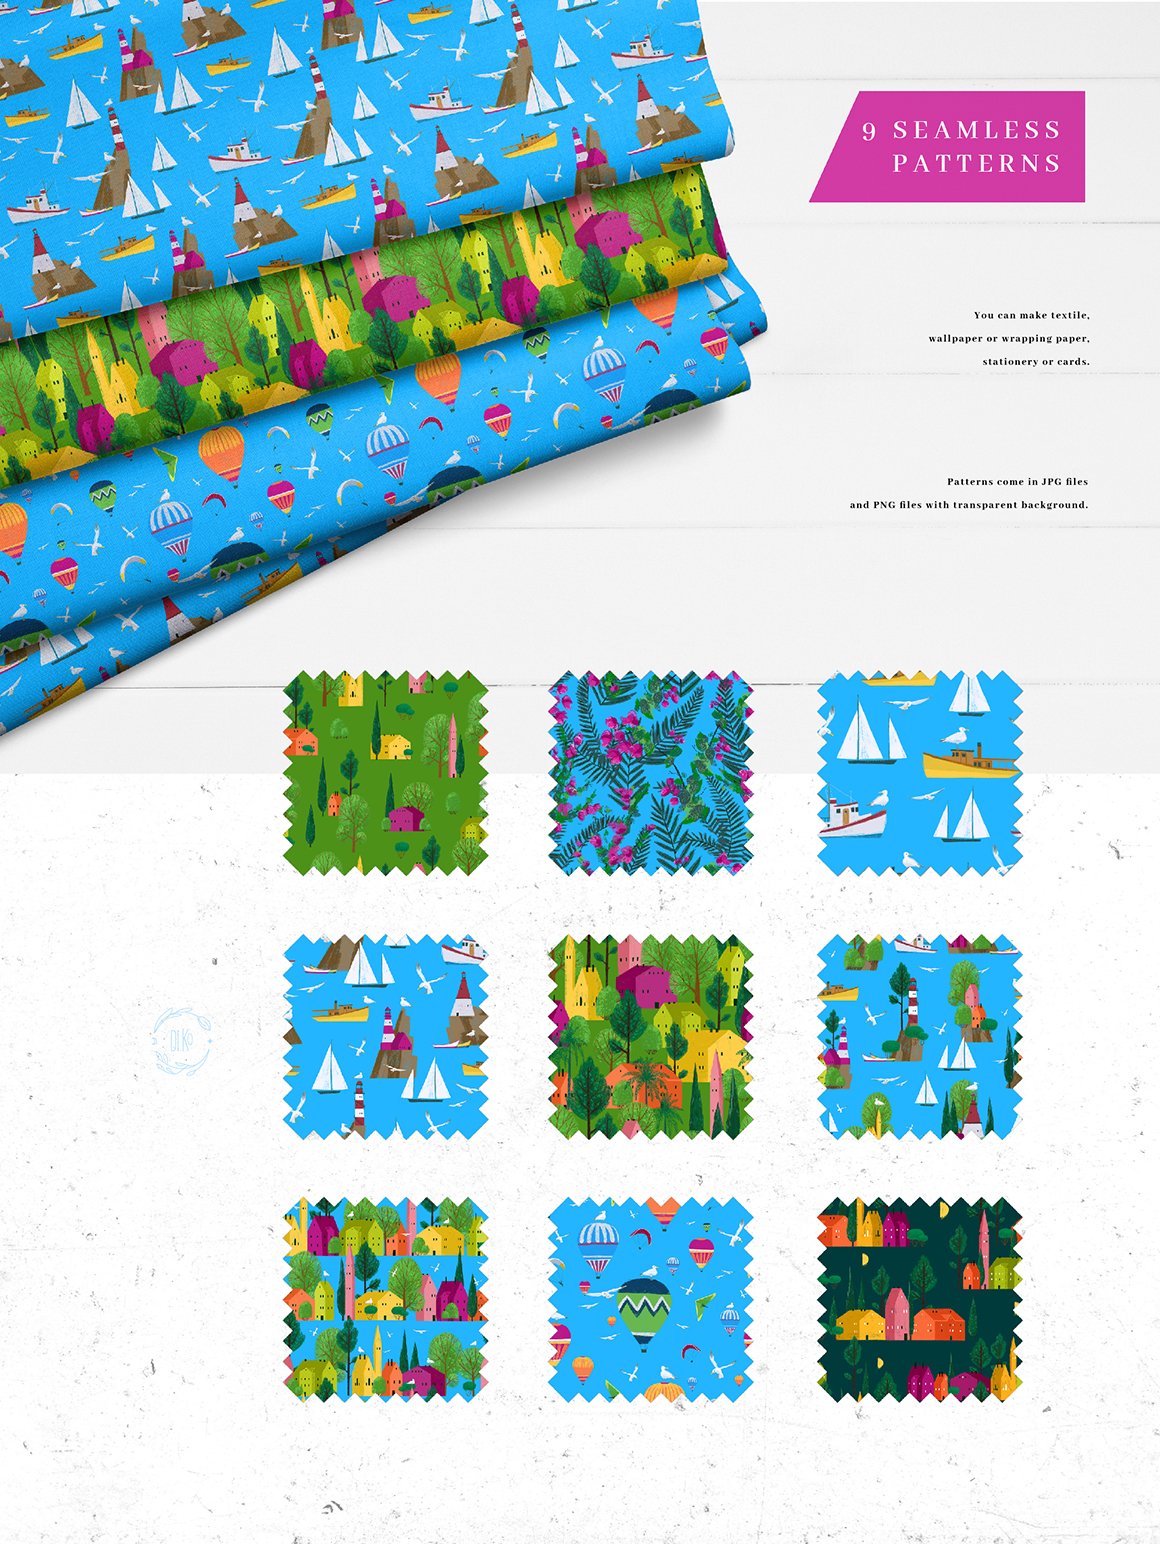 Pre-made themed seamless patterns designs.